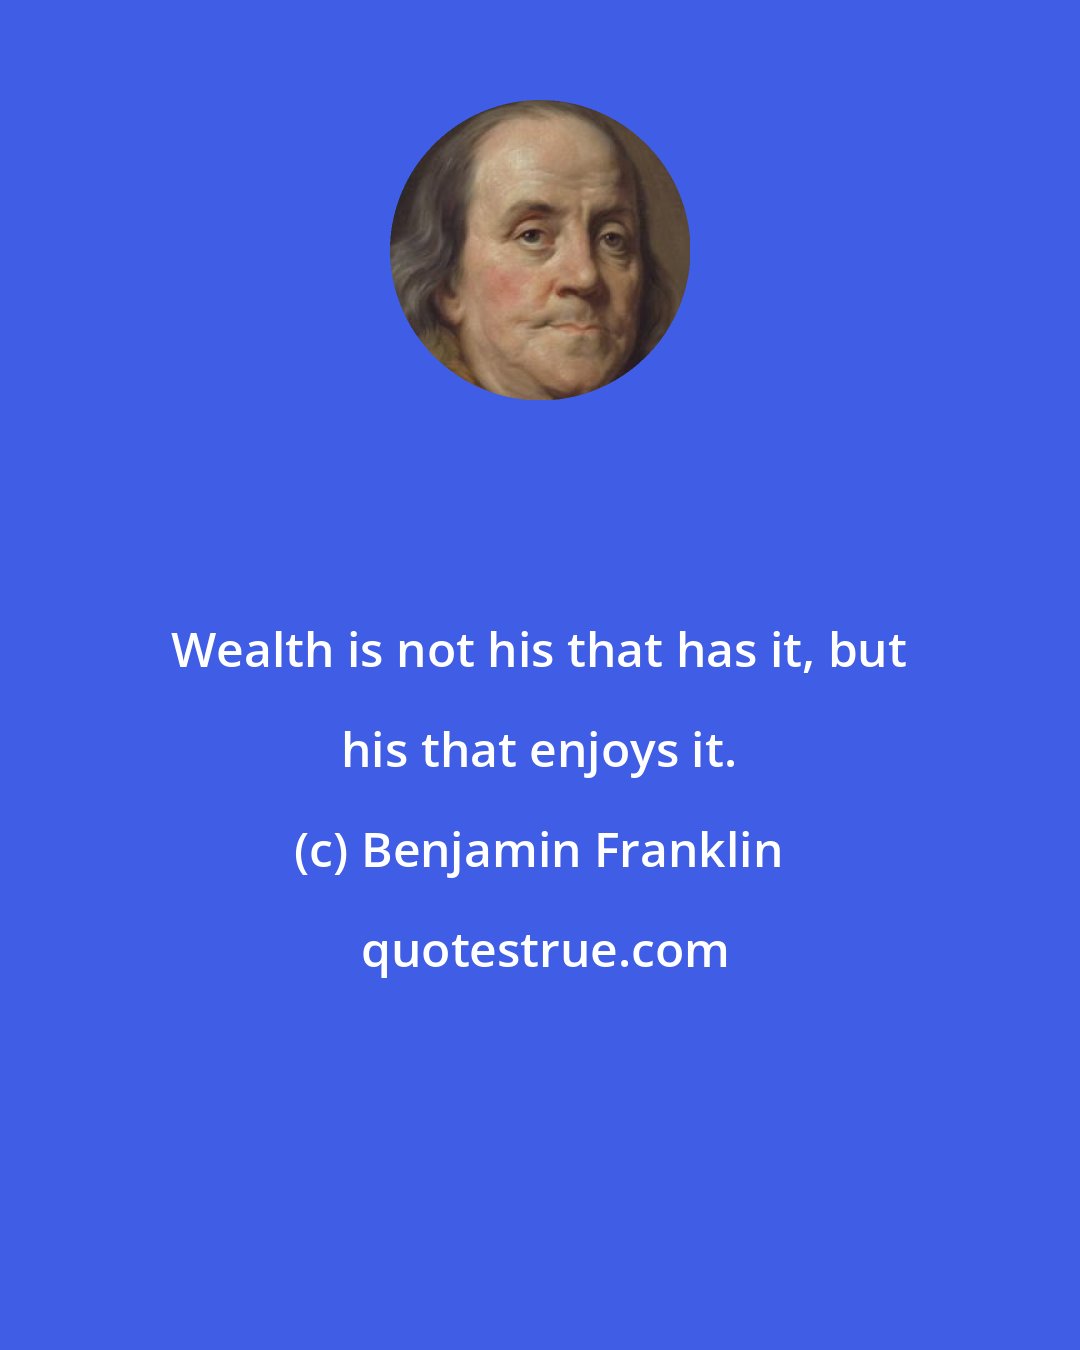 Benjamin Franklin: Wealth is not his that has it, but his that enjoys it.